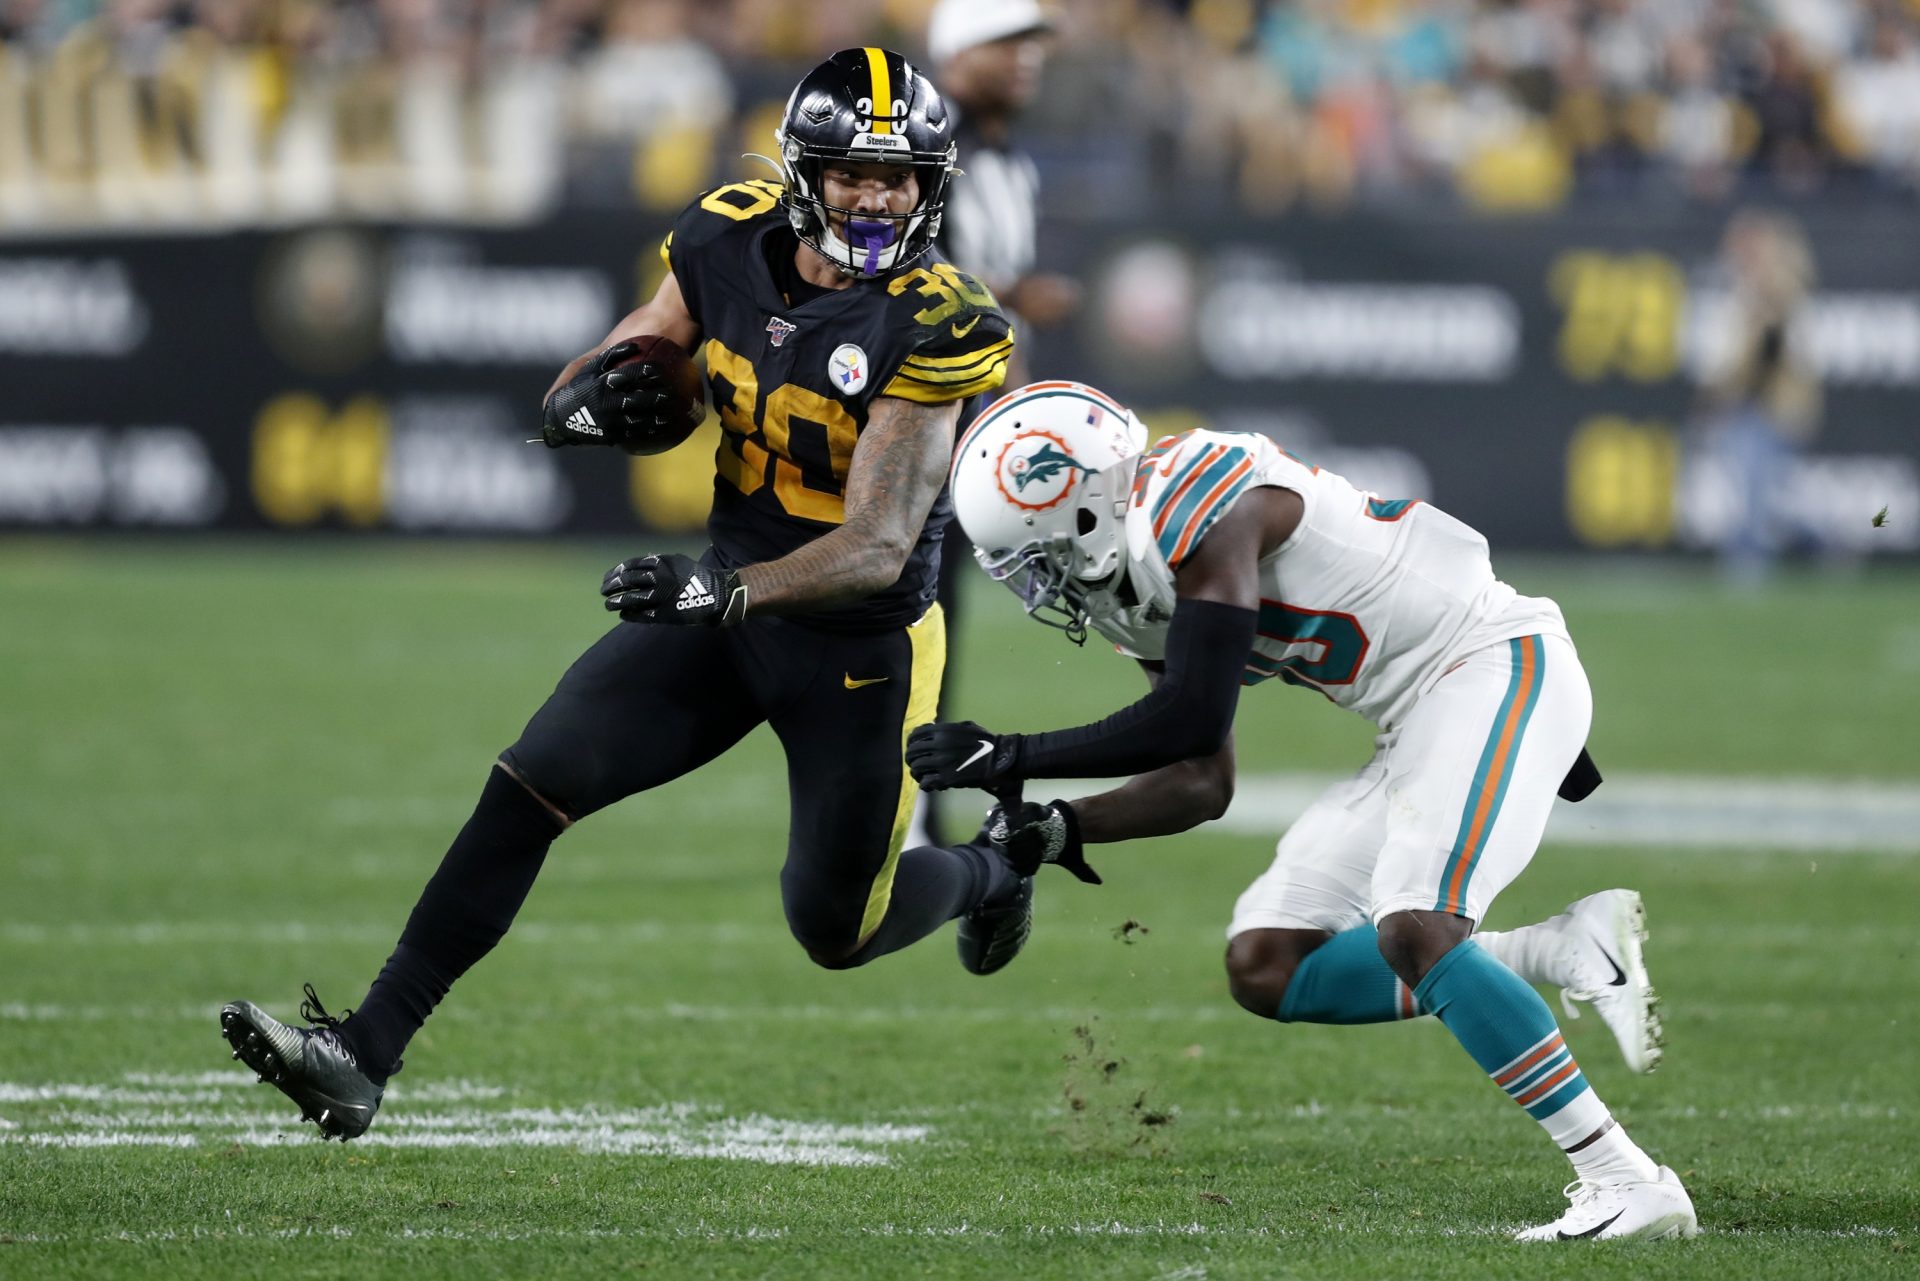 Pittsburgh Steelers running back James Conner (30) runs around Miami Dolphins defensive back Chris Lammons (30) during the second half of an NFL football game in Pittsburgh, Monday, Oct. 28, 2019.